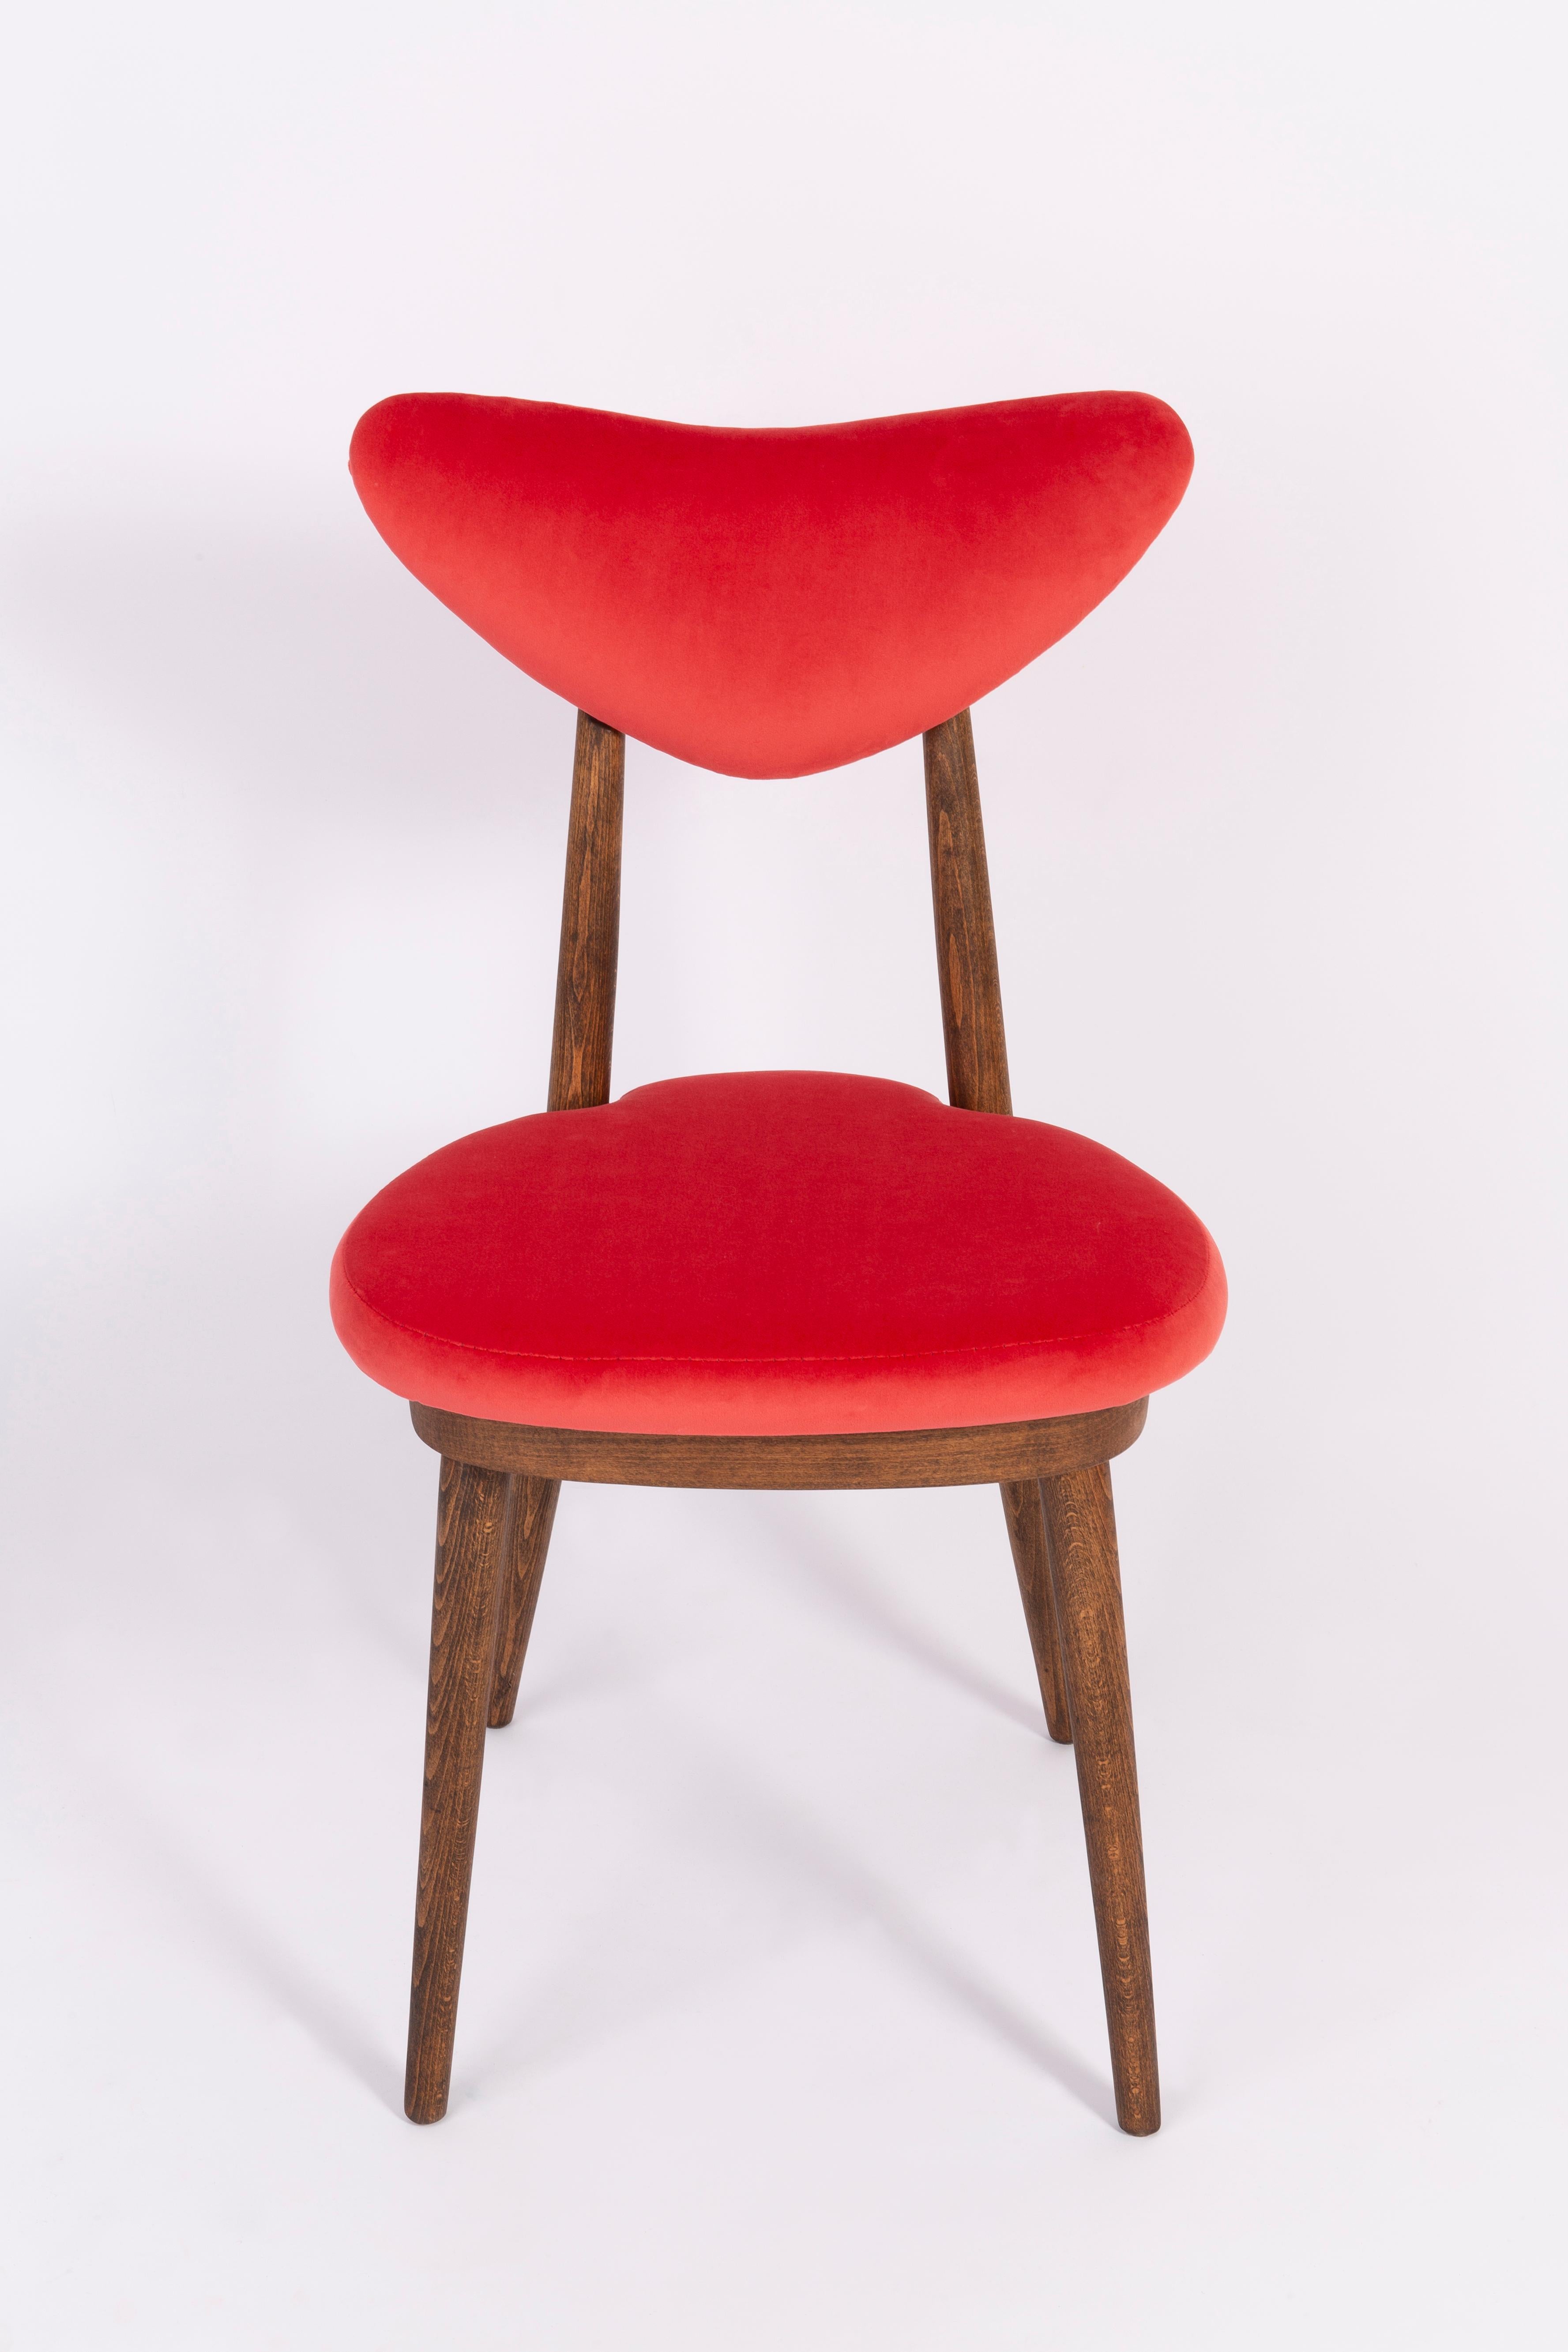 Set of Two Red Heart Chairs, Poland, 1960s For Sale 5